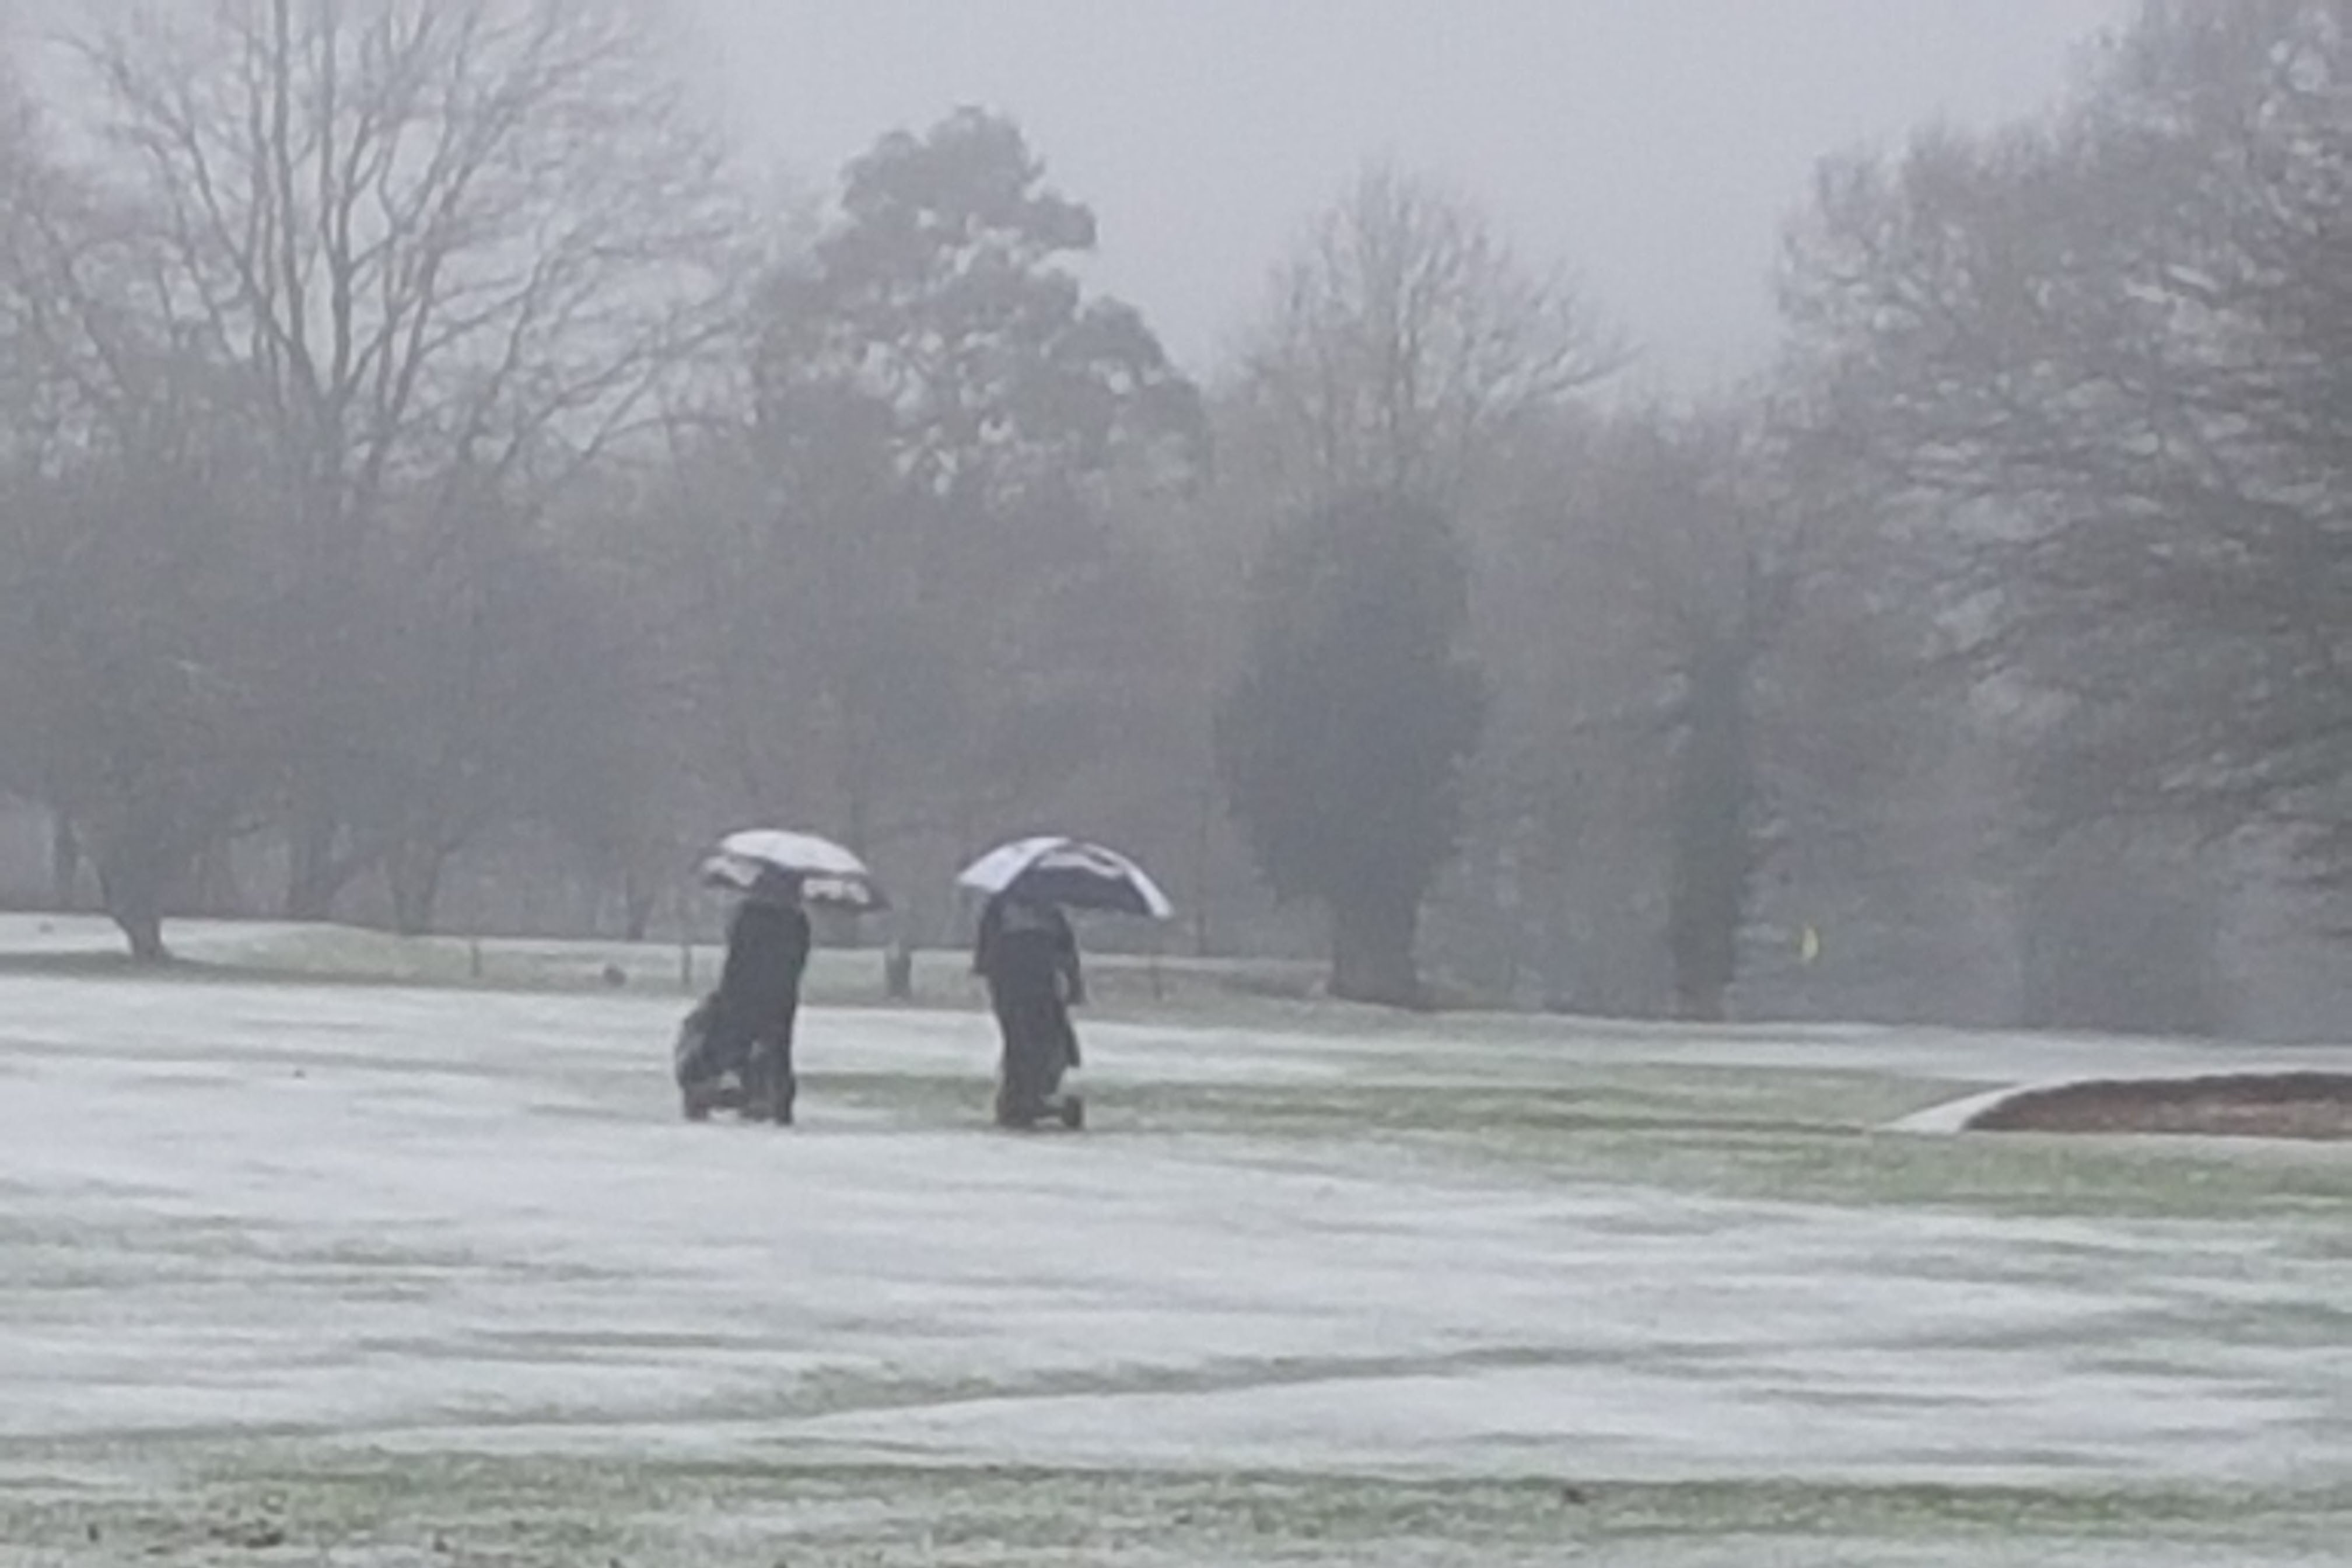 The course is playable in all weathers!